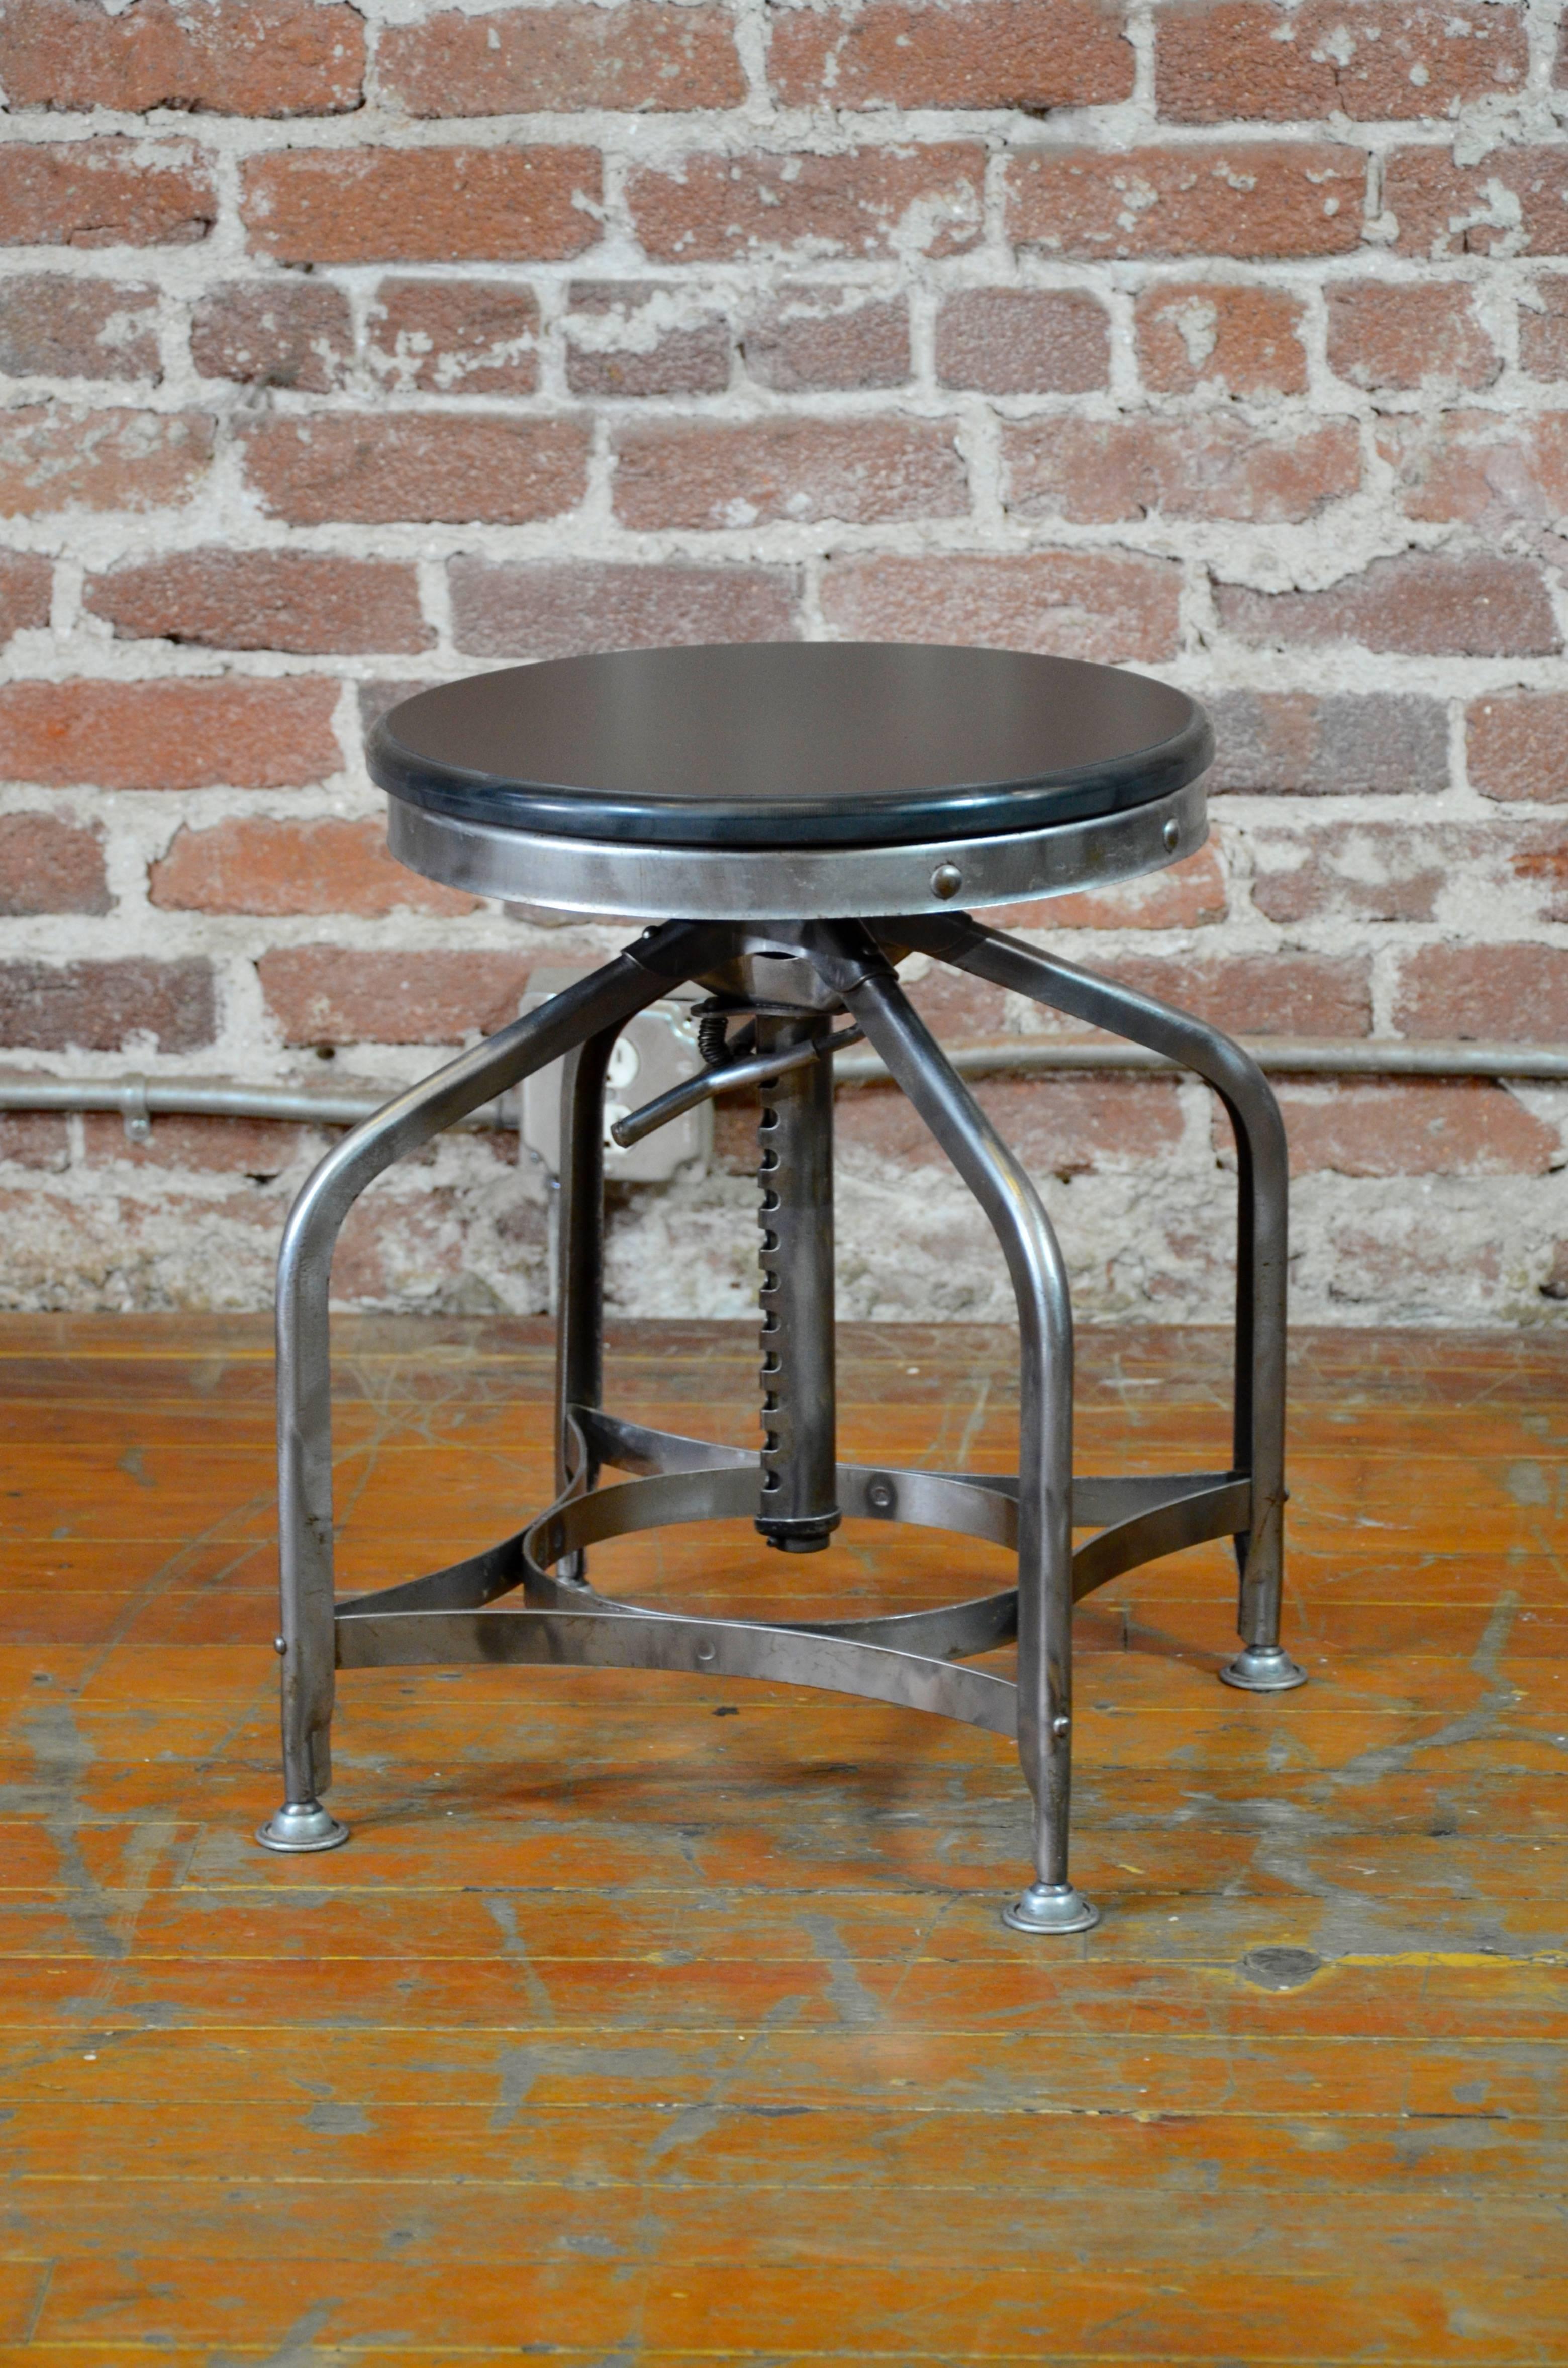 Handsomely authentic collection of polished steel lab stools by Toledo. These are adjustable from 19.5